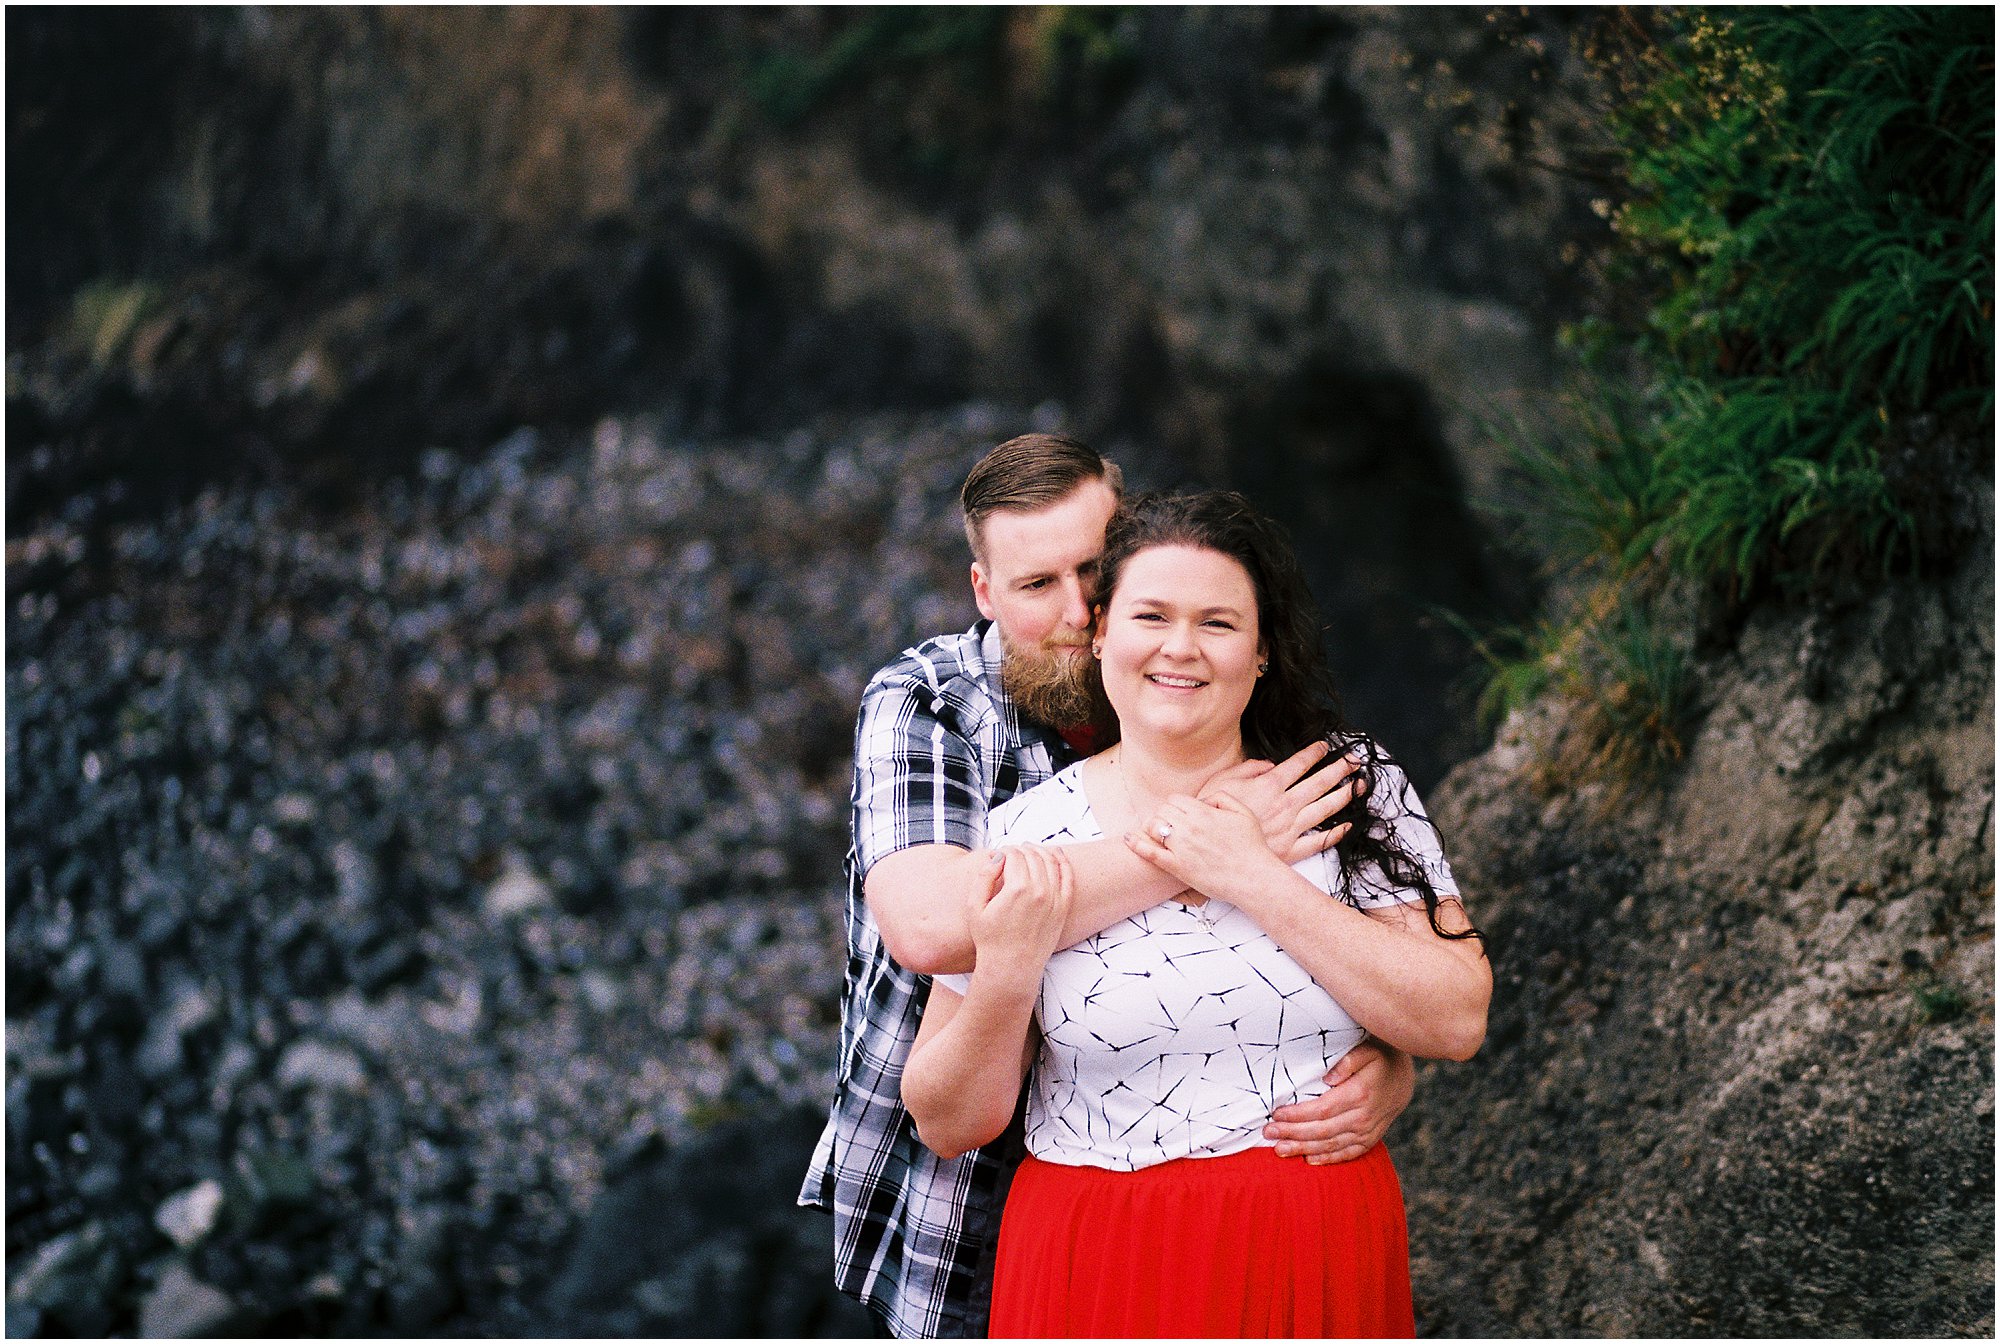 Fine art film photography at this WA Coast adventure session. | Erica Swantek Photography